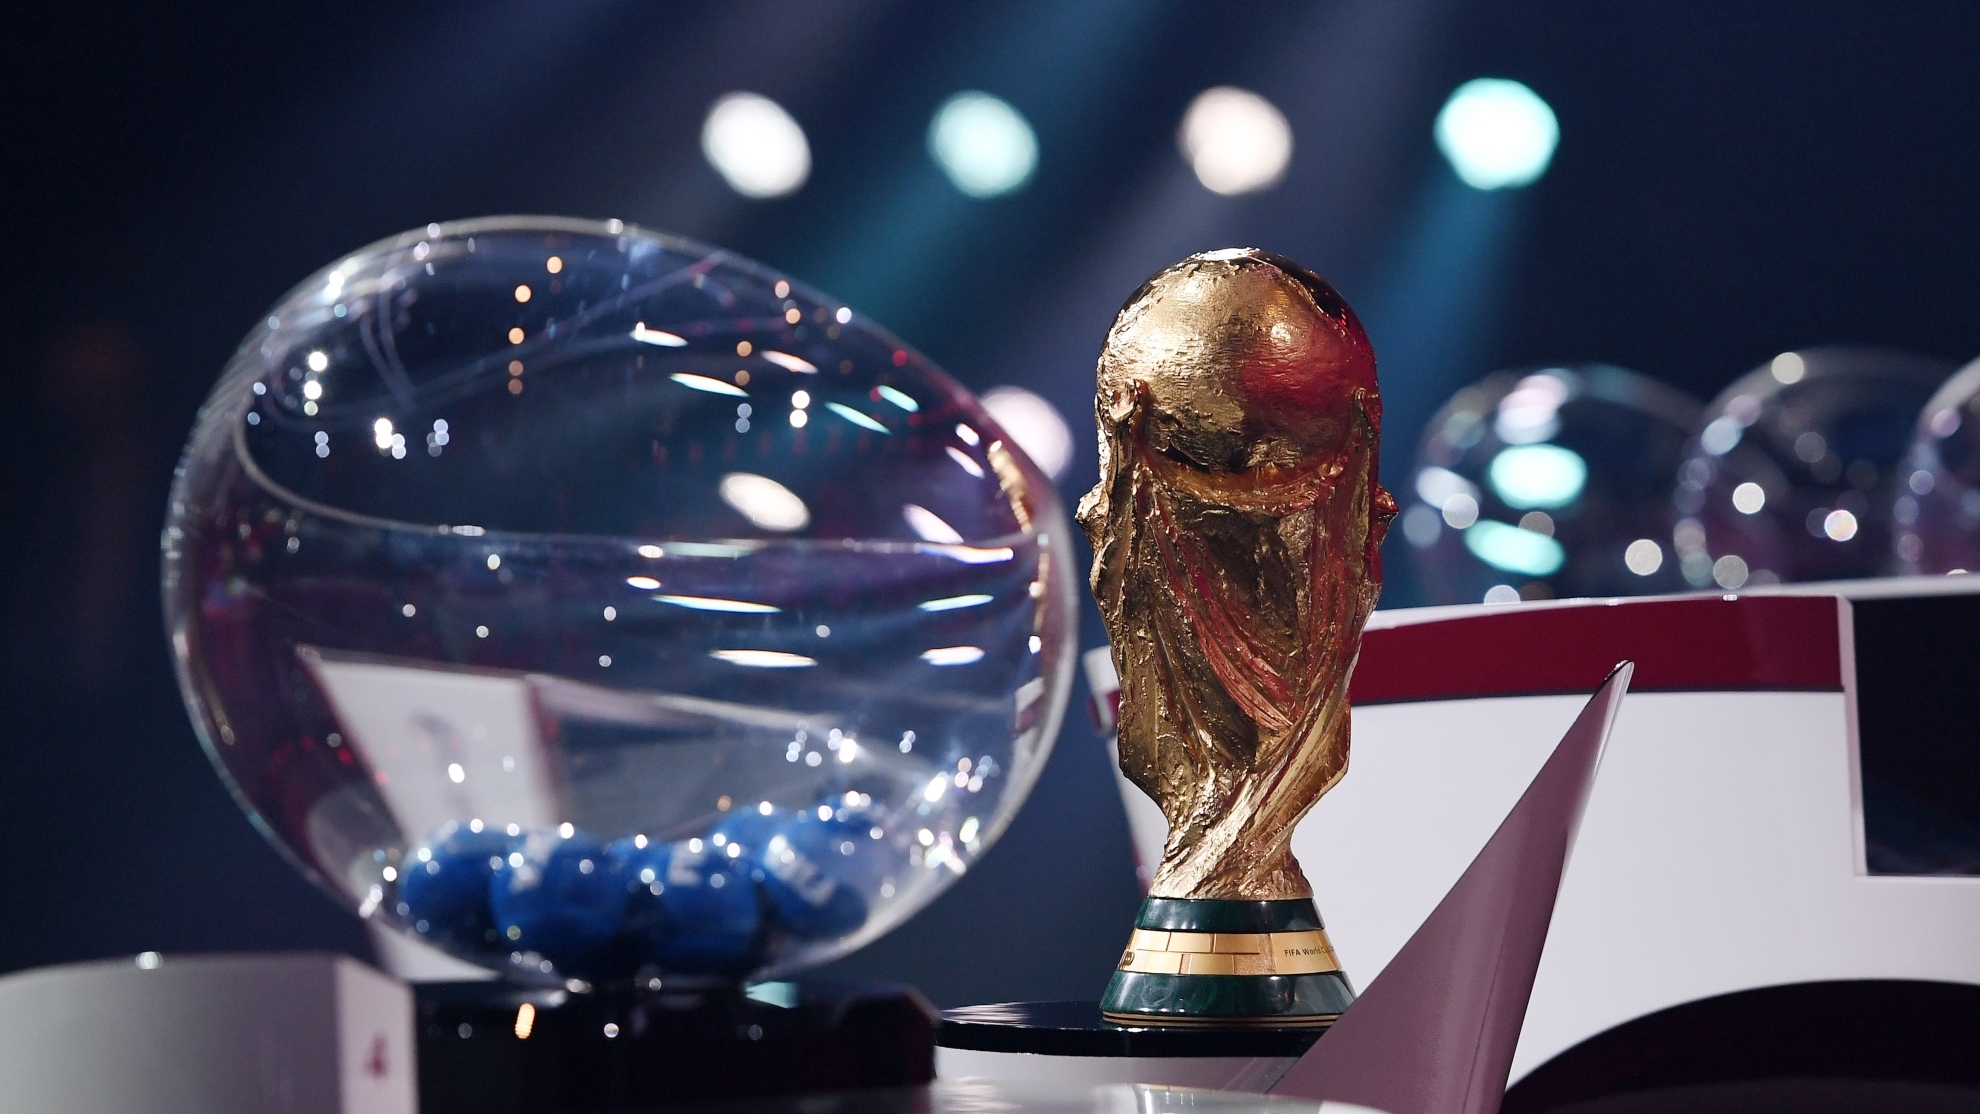 FIFA World Cup groups 2022: Group F - Belgium, Canada, Morocco, Croatia; Hazard, Modric, Alphonso Davies and Hakimi will feature in Group F, Check teams and fixtures - WC 2022 Schedule